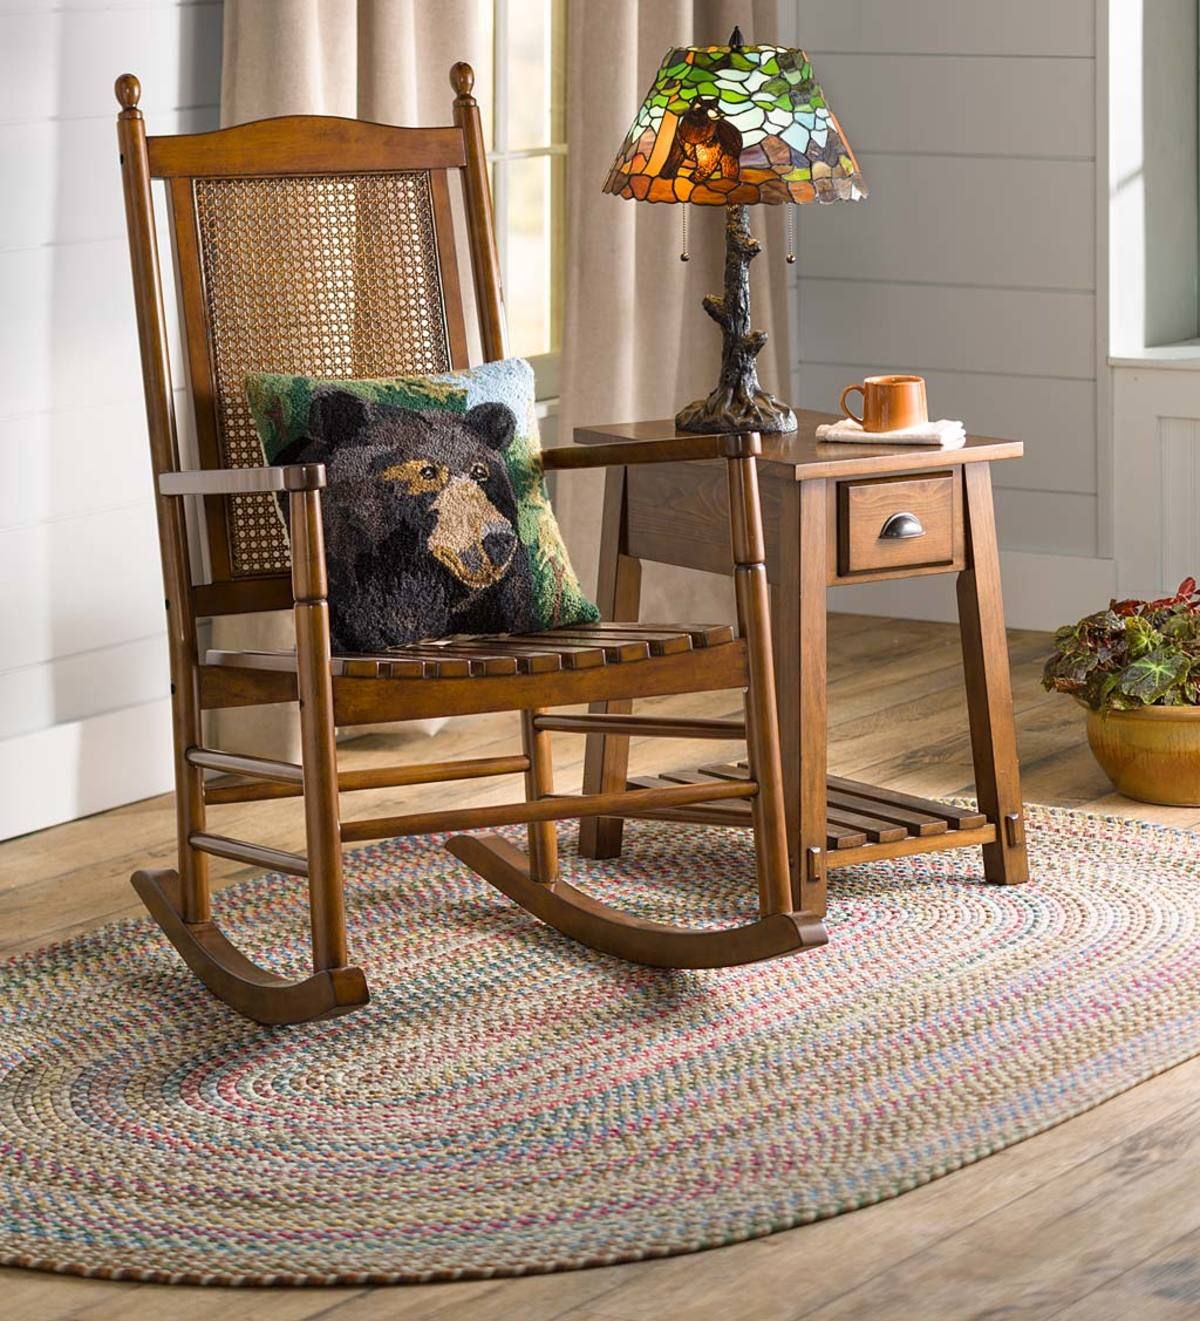 Berkley Birch Rocking Chair With Cane Back | Plowhearth Throughout Warm Brown Slat Back Rocking Chairs (View 20 of 20)